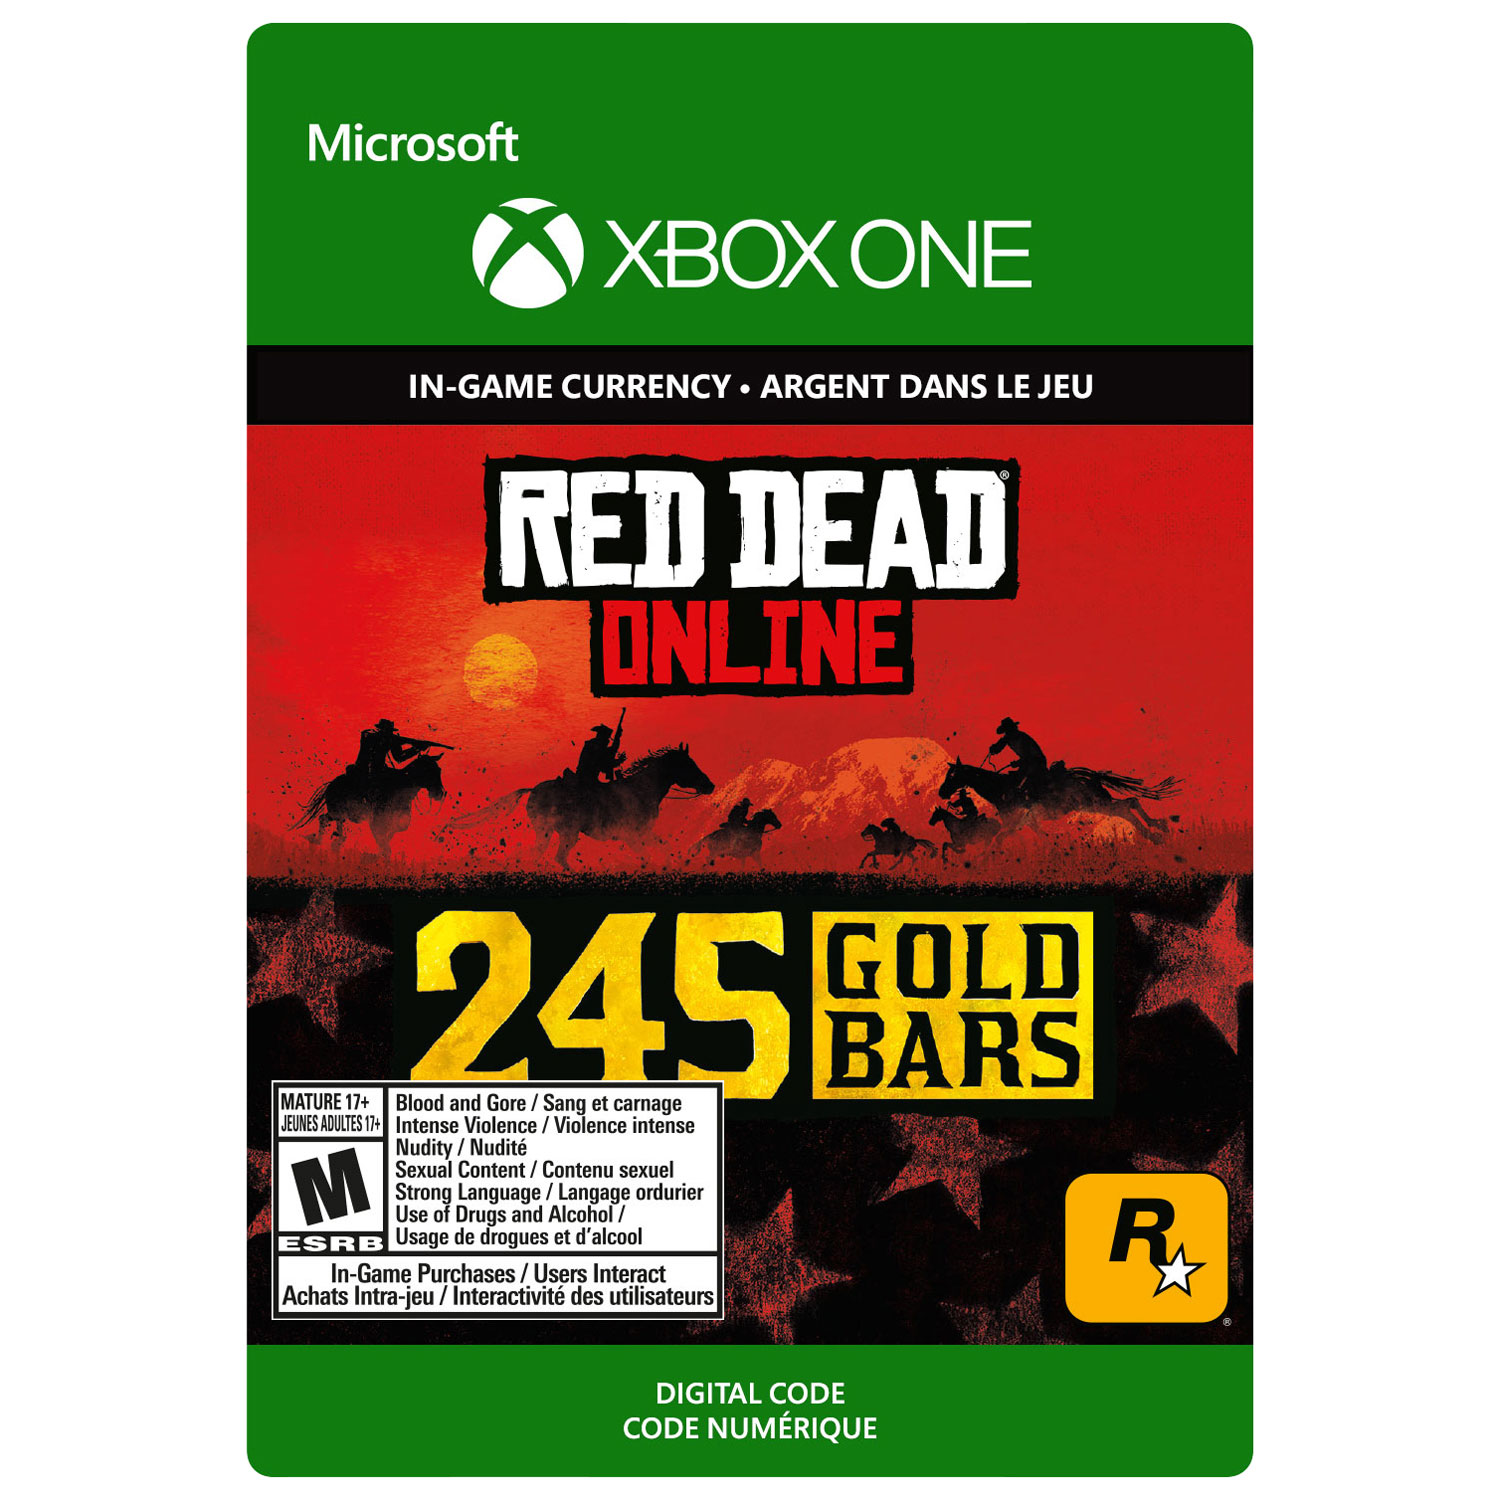 Red Dead Redemption 2: 245 Gold Bars (Xbox One) - Digital Download